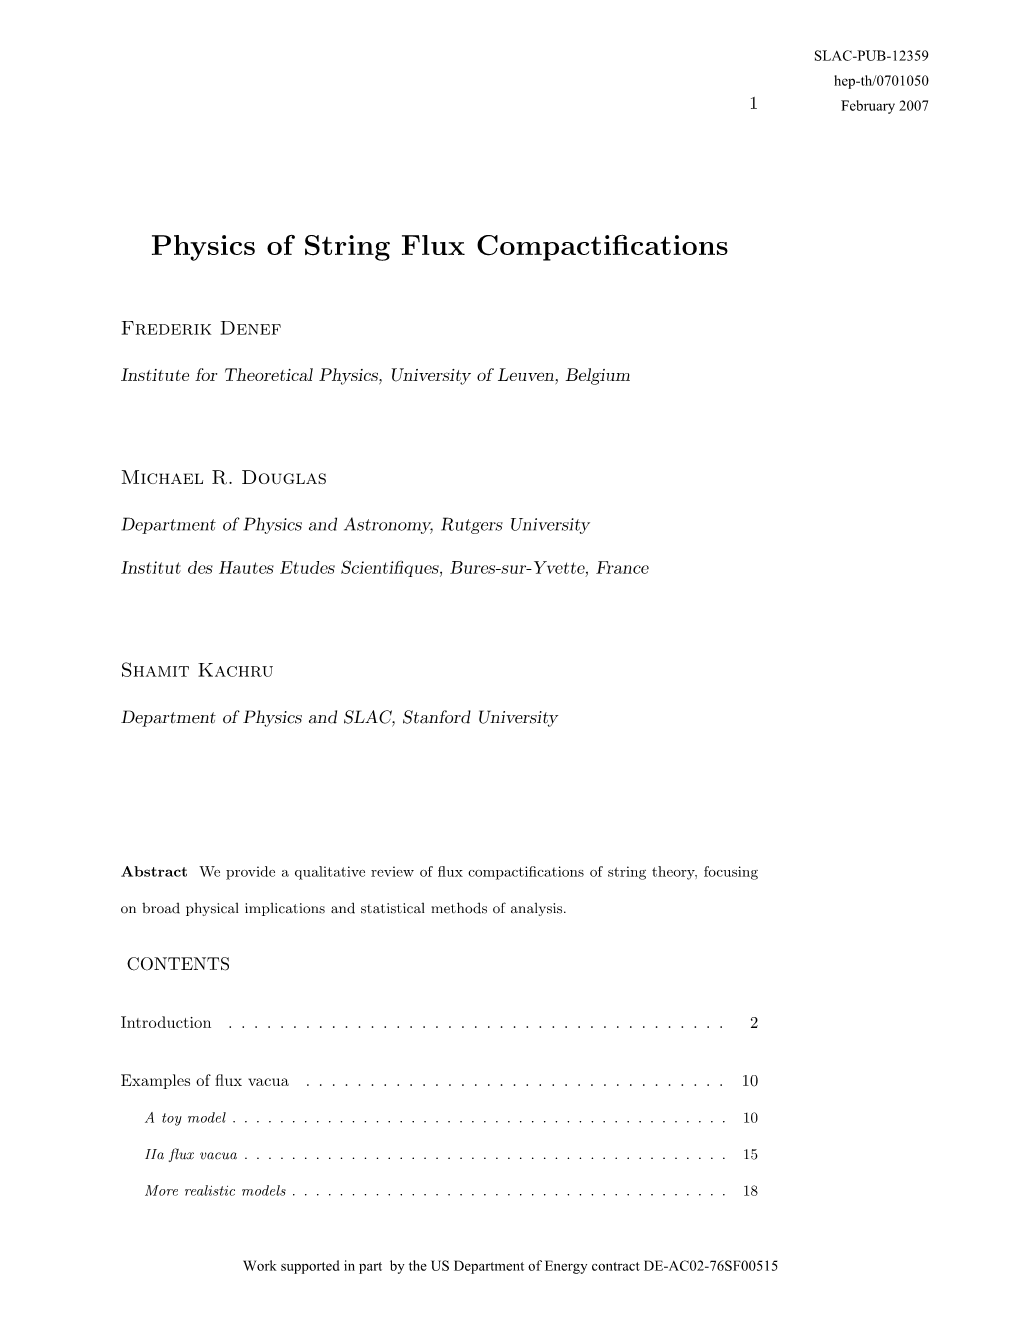 Physics of String Flux Compactifications